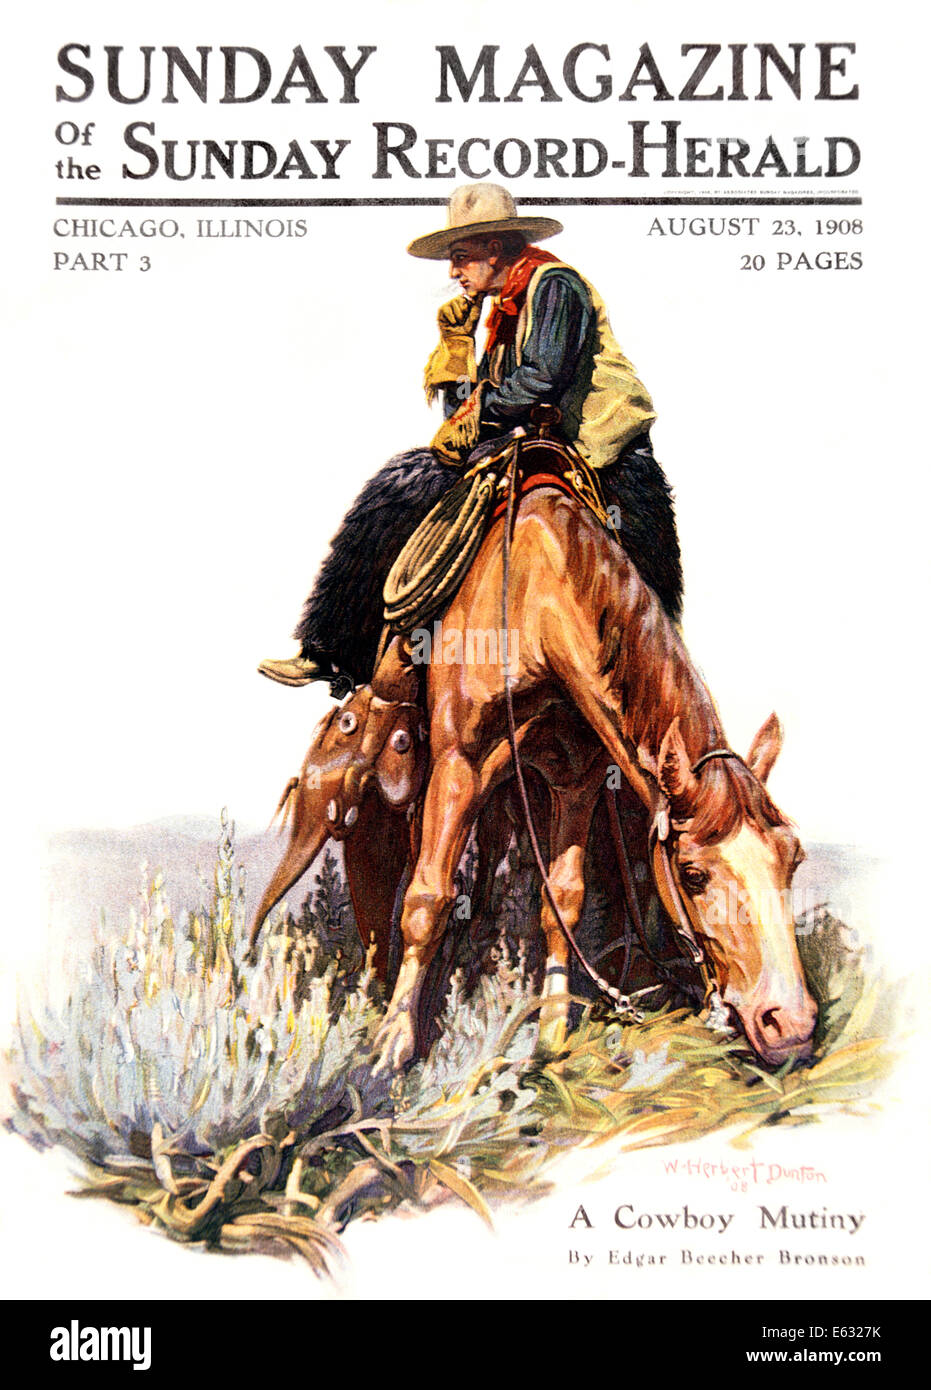 1900s SUNDAY MAGAZINE COVER LONE COWBOY SITTING RESTING ON HORSE WEARING WOOLY CHAPS Stock Photo